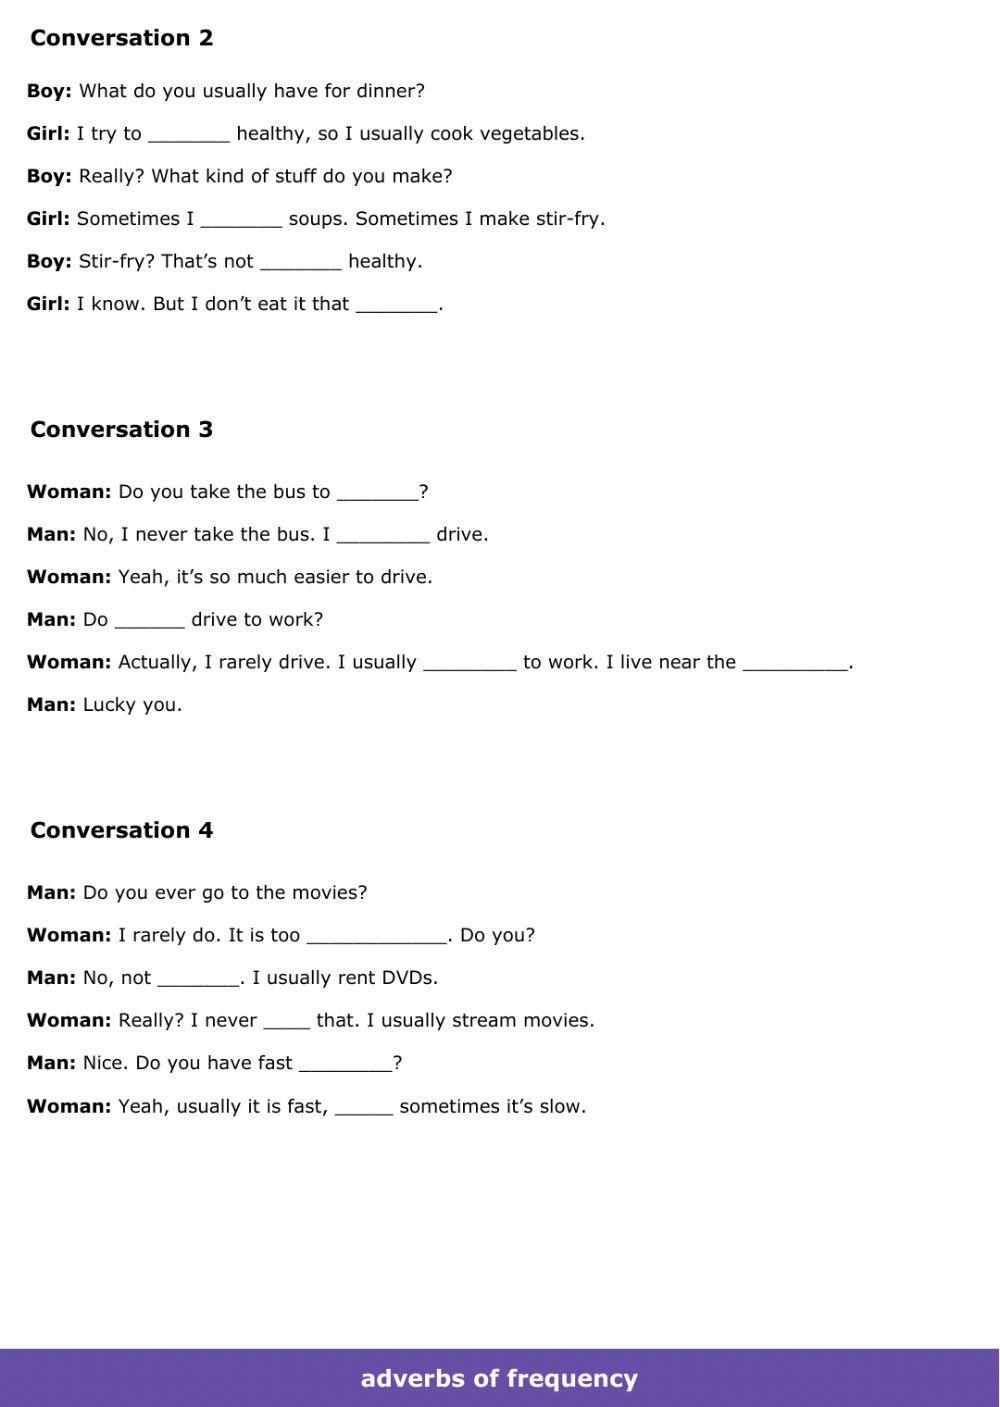 Adverb of Frequency - conversations - Fill in the blanks